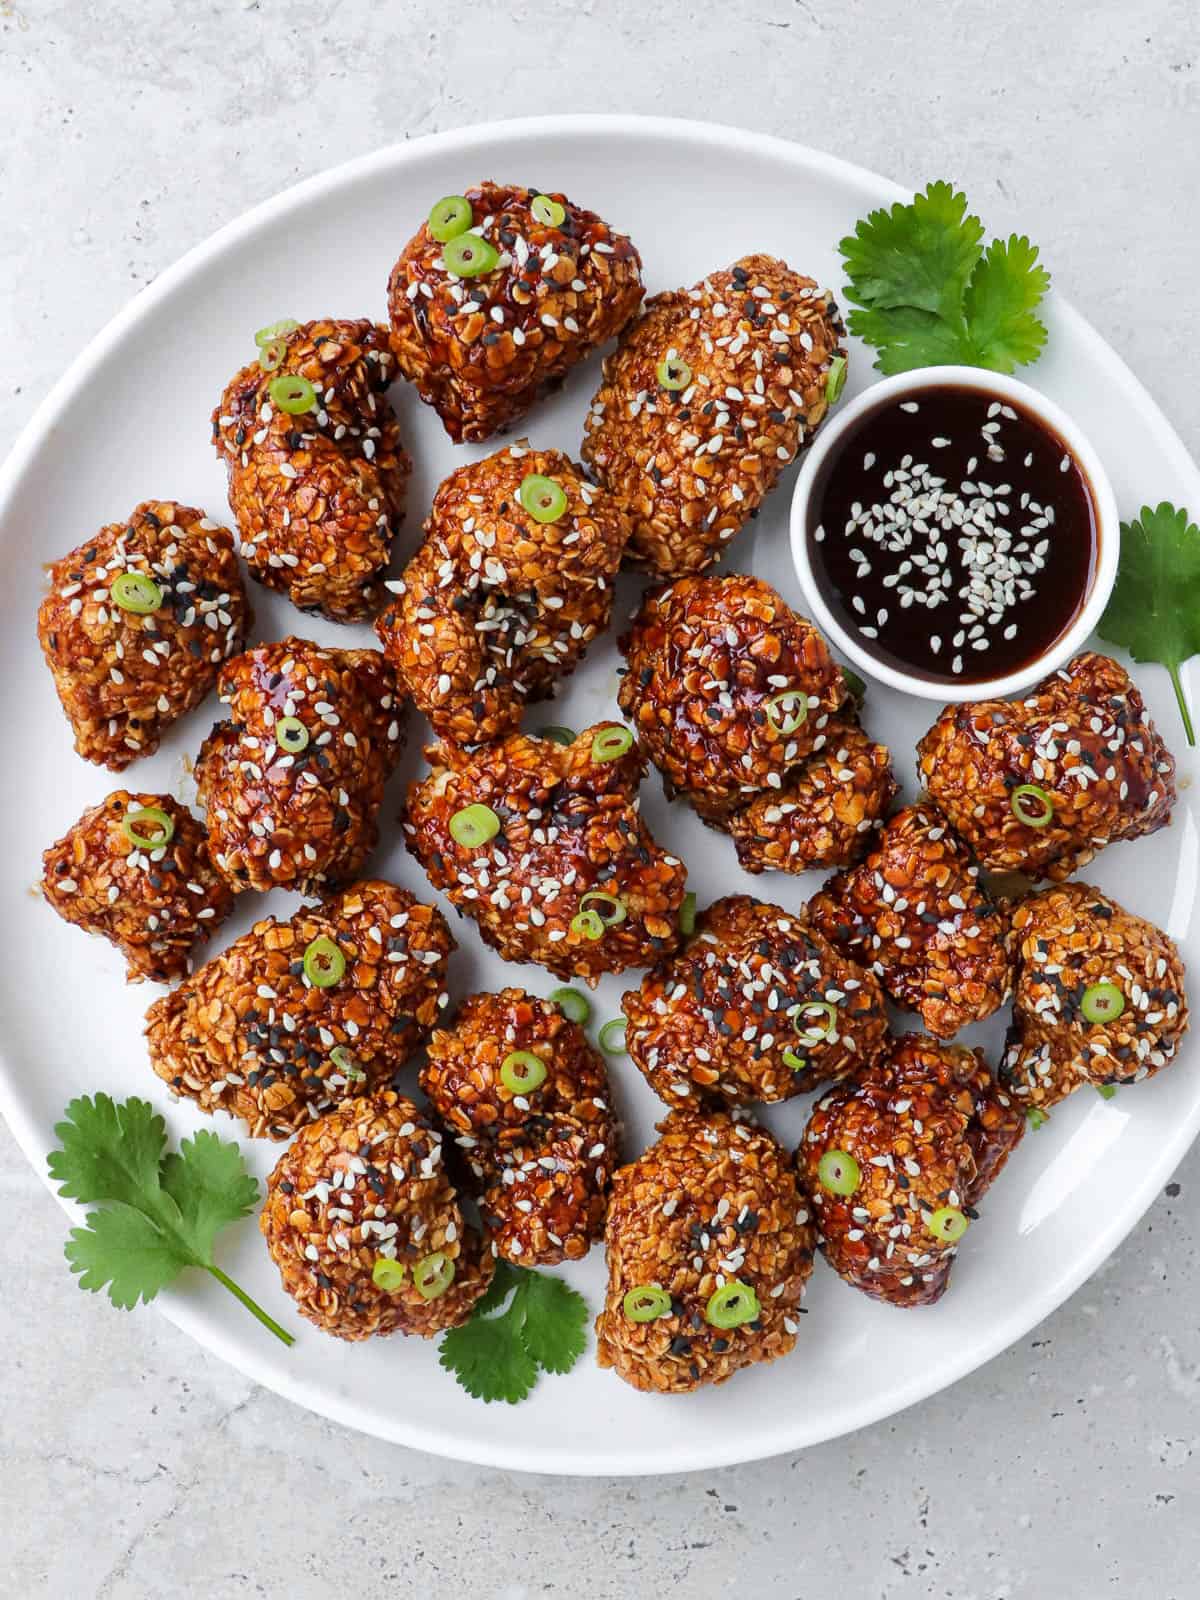 Teriyaki cauliflower wings topped with spring onions on a plate with coriander leaves and sauce on side.